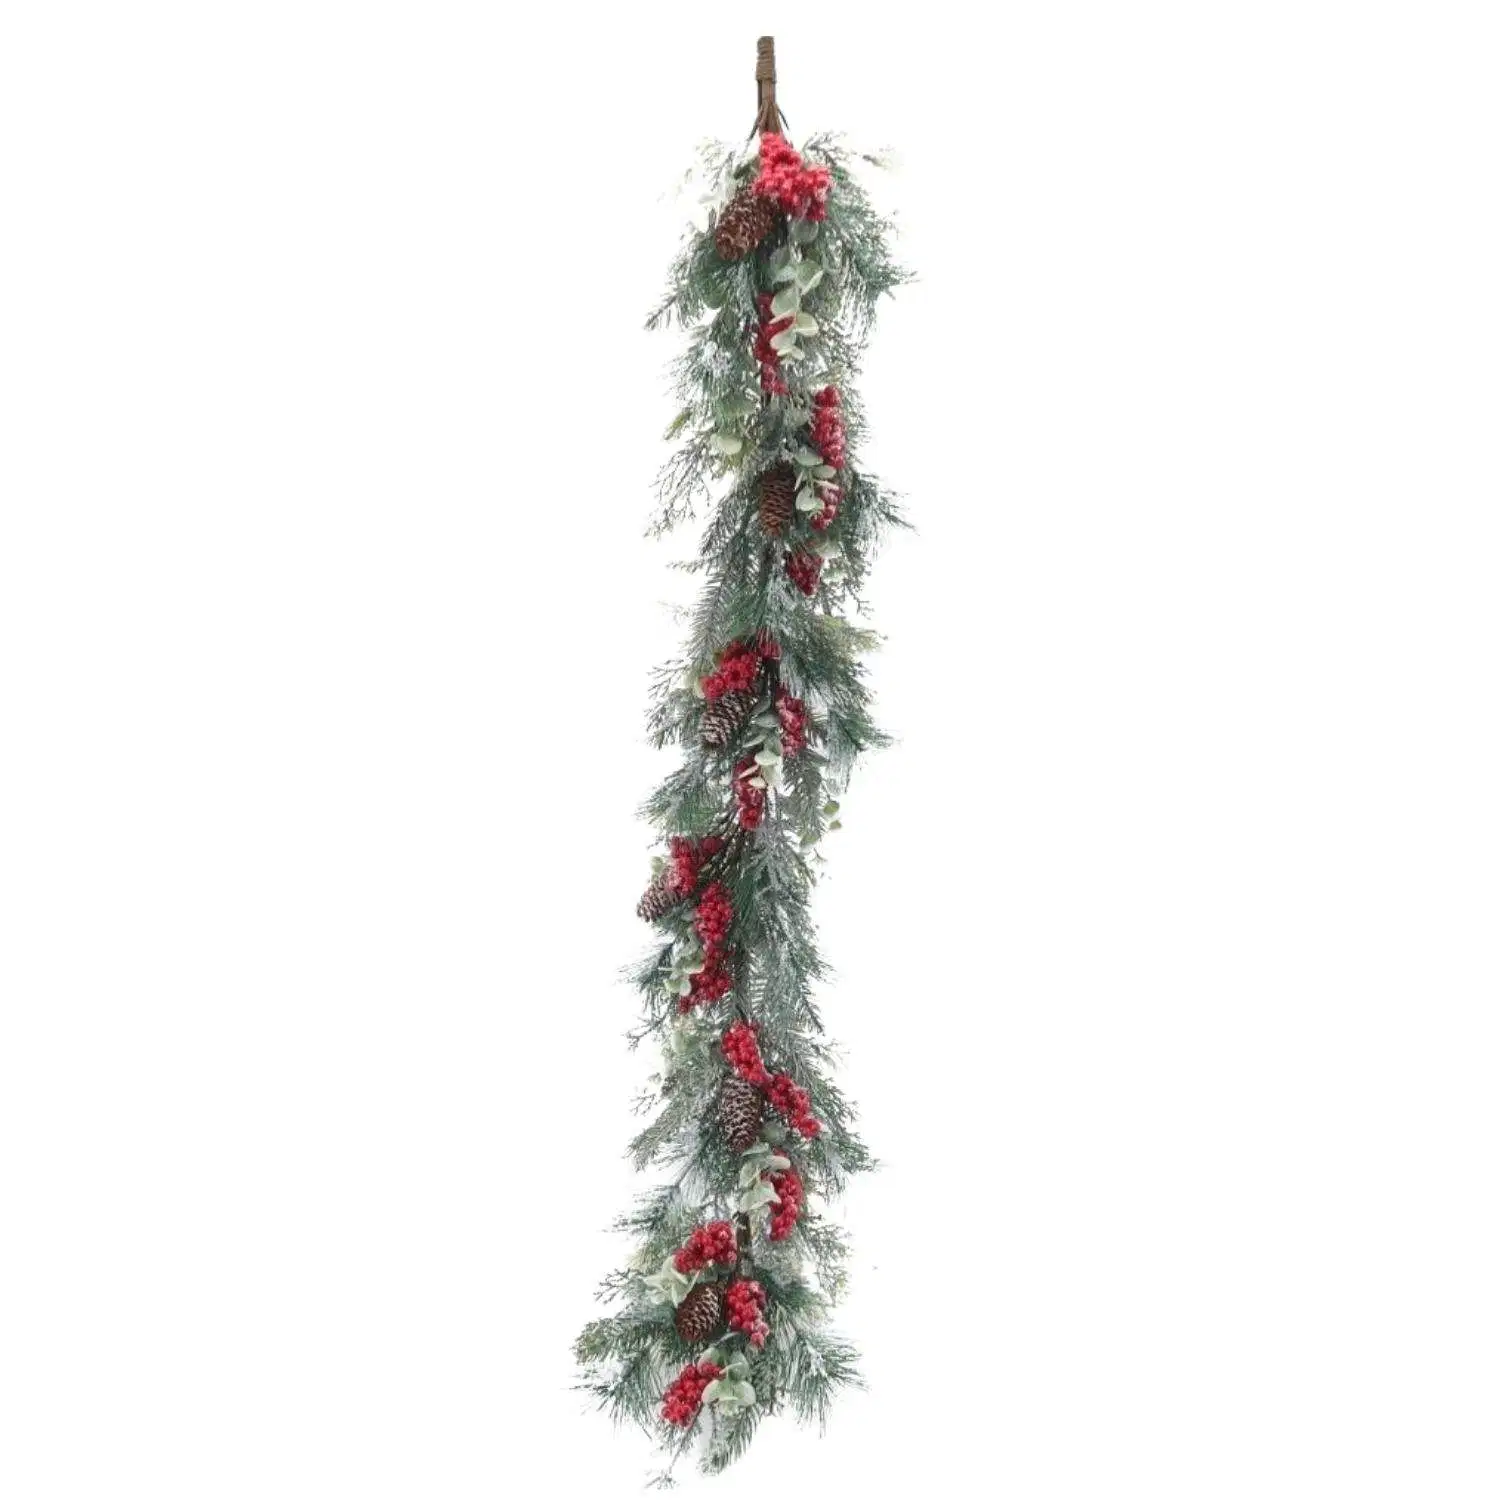 Home Decorations Party Holiday Supplies Frosted Pine Needles Pine Leaf with Pinecones and Berries Greenery Christmas Garland